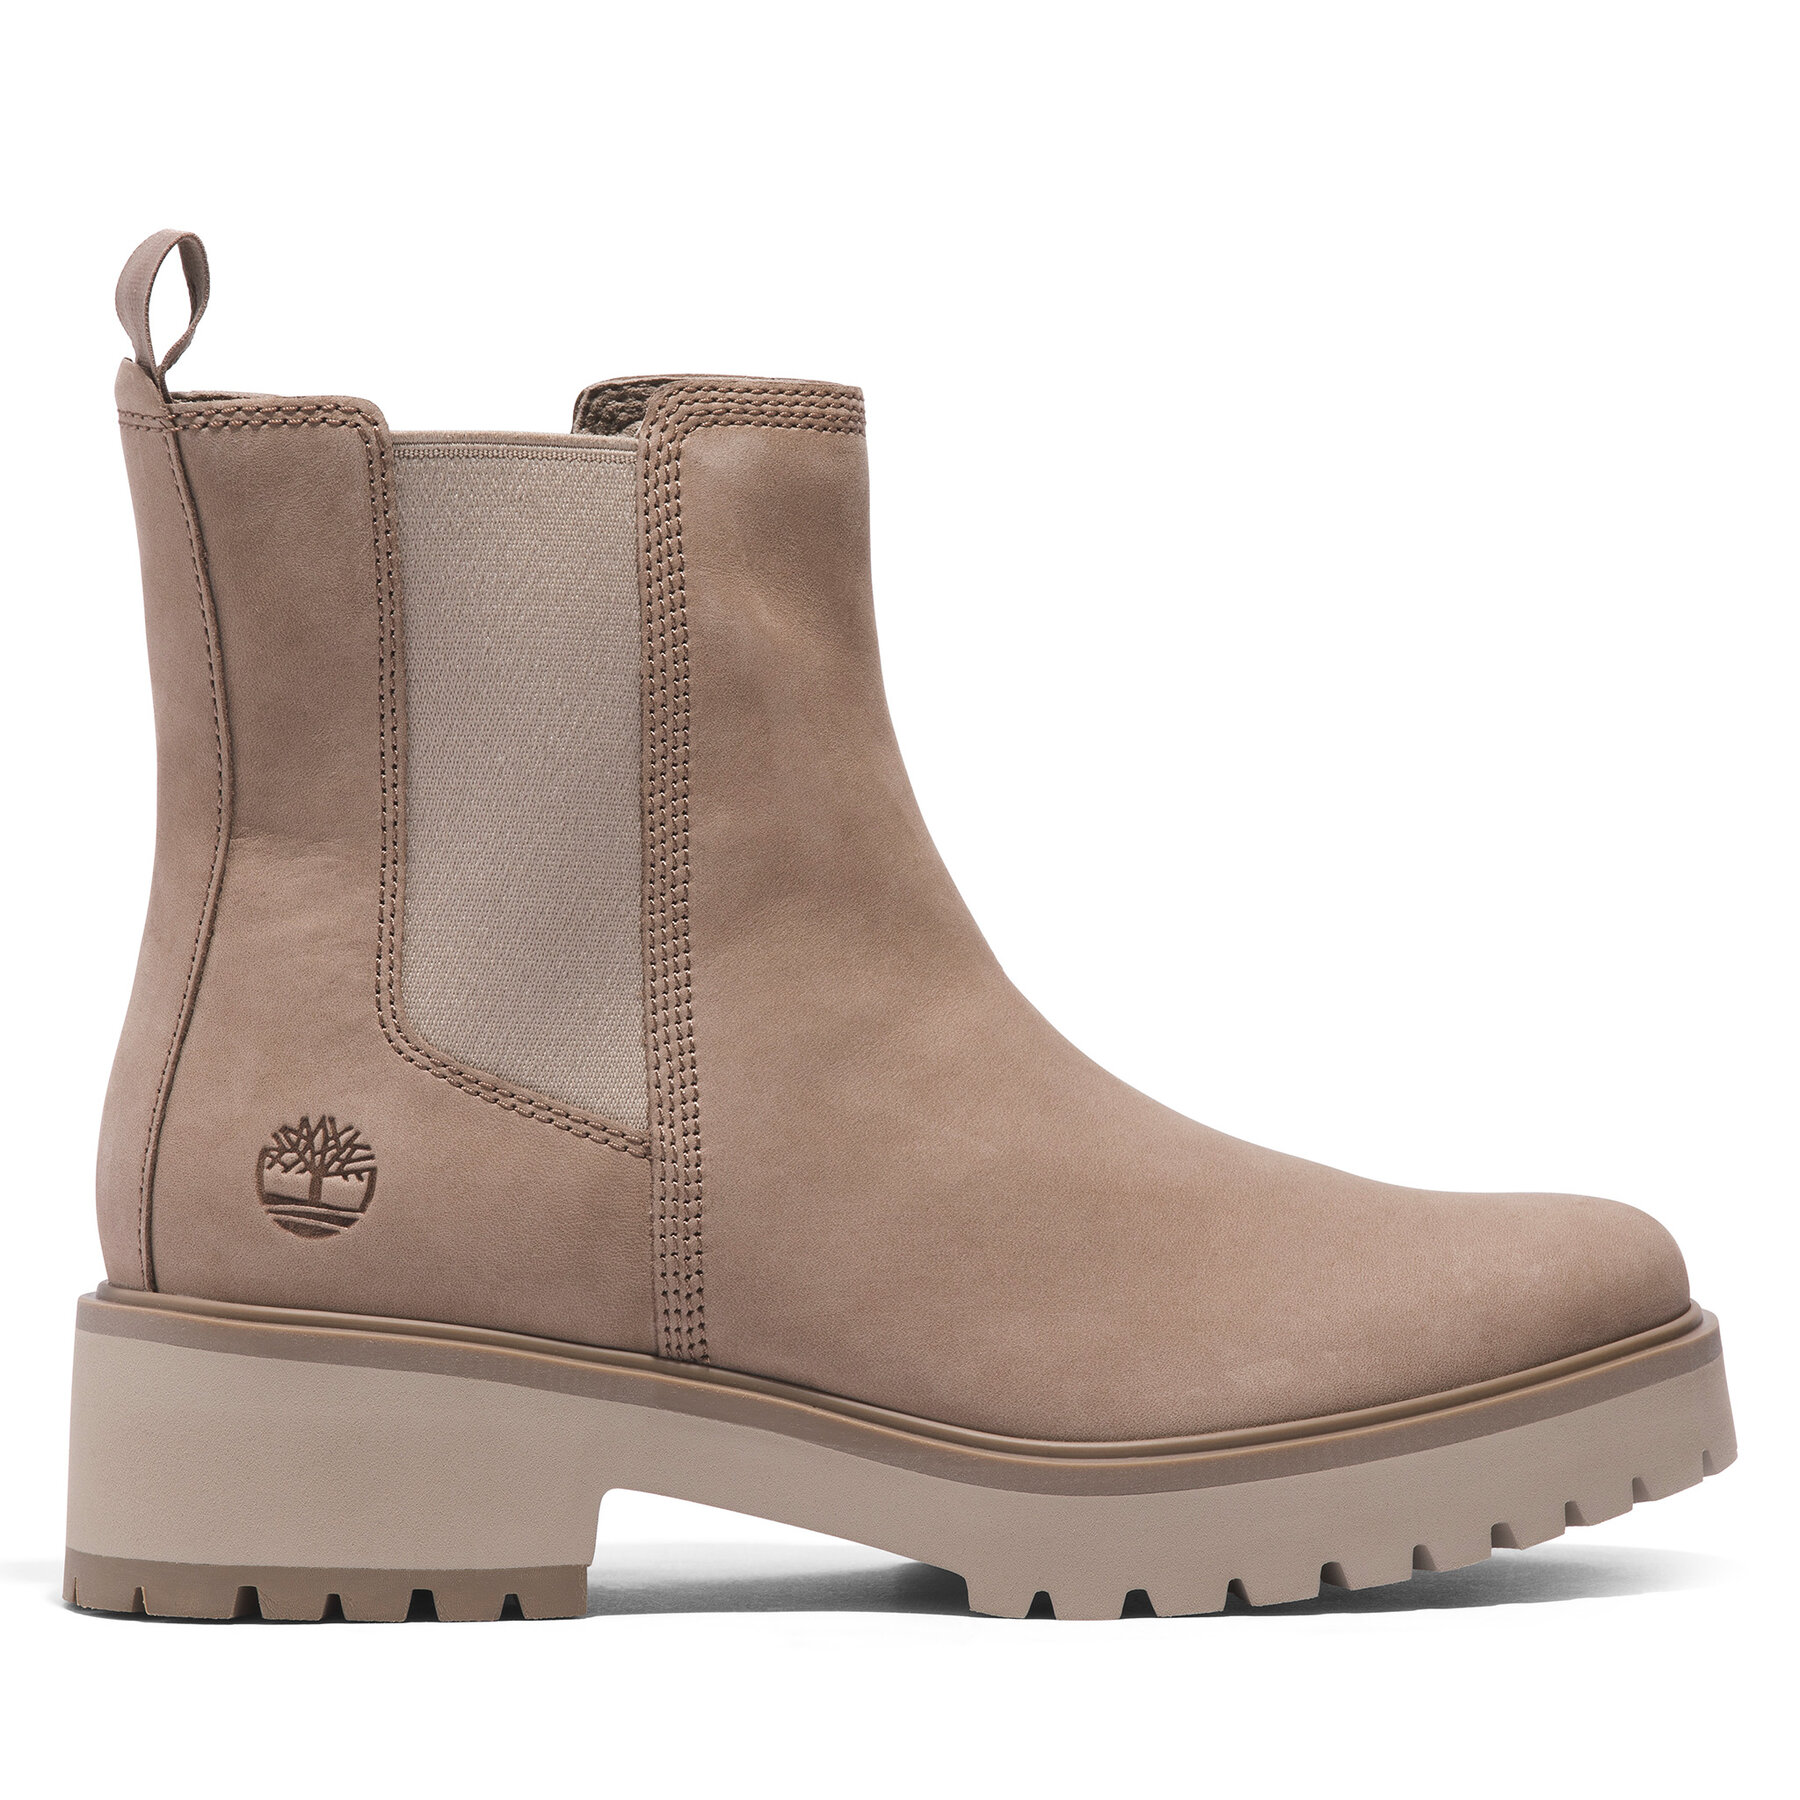 Klassische Stiefeletten Timberland Carnaby Cool Basic Chlsea TB0A41CW9291 Taupe Nubuck von Timberland